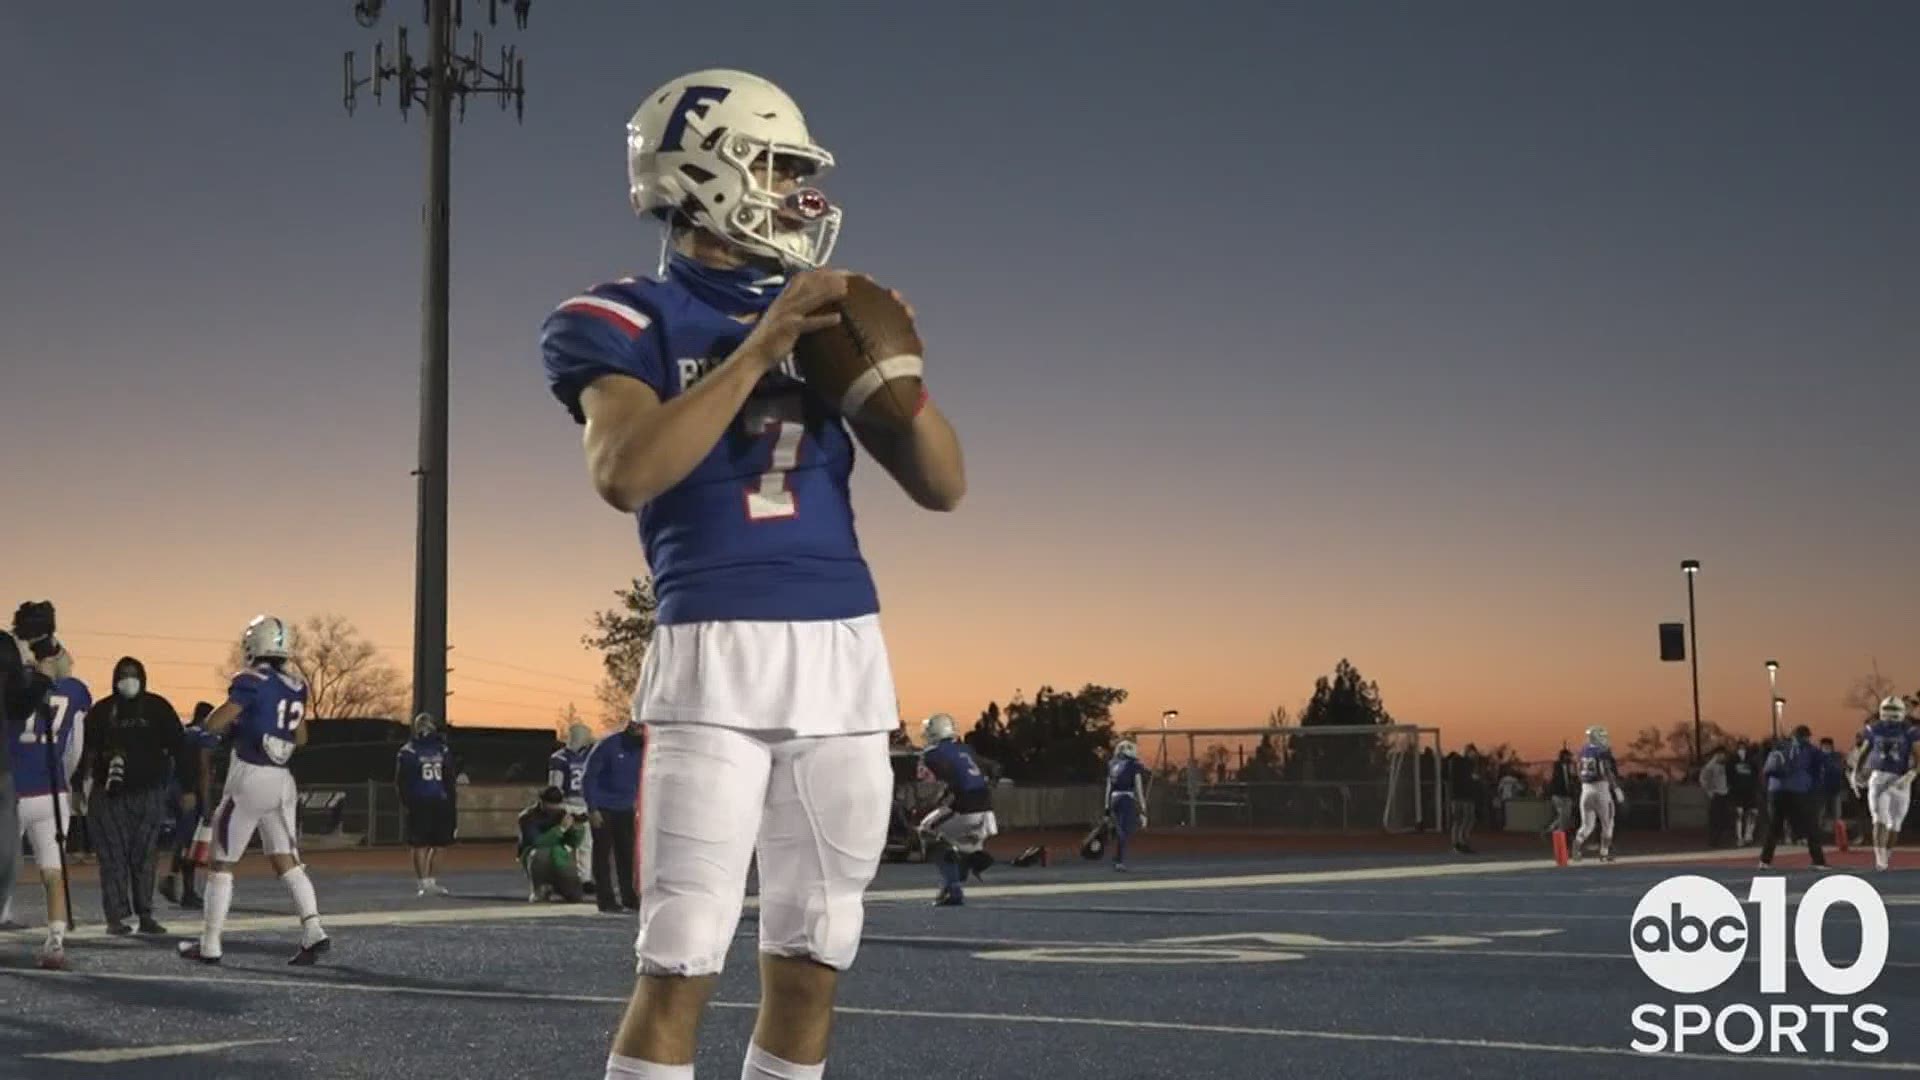 In the ABC10 Game of the Week, it was the Rocklin Thunder rolling past the Oak Ridge Trojans 38-13 in week three of the spring high school football schedule.